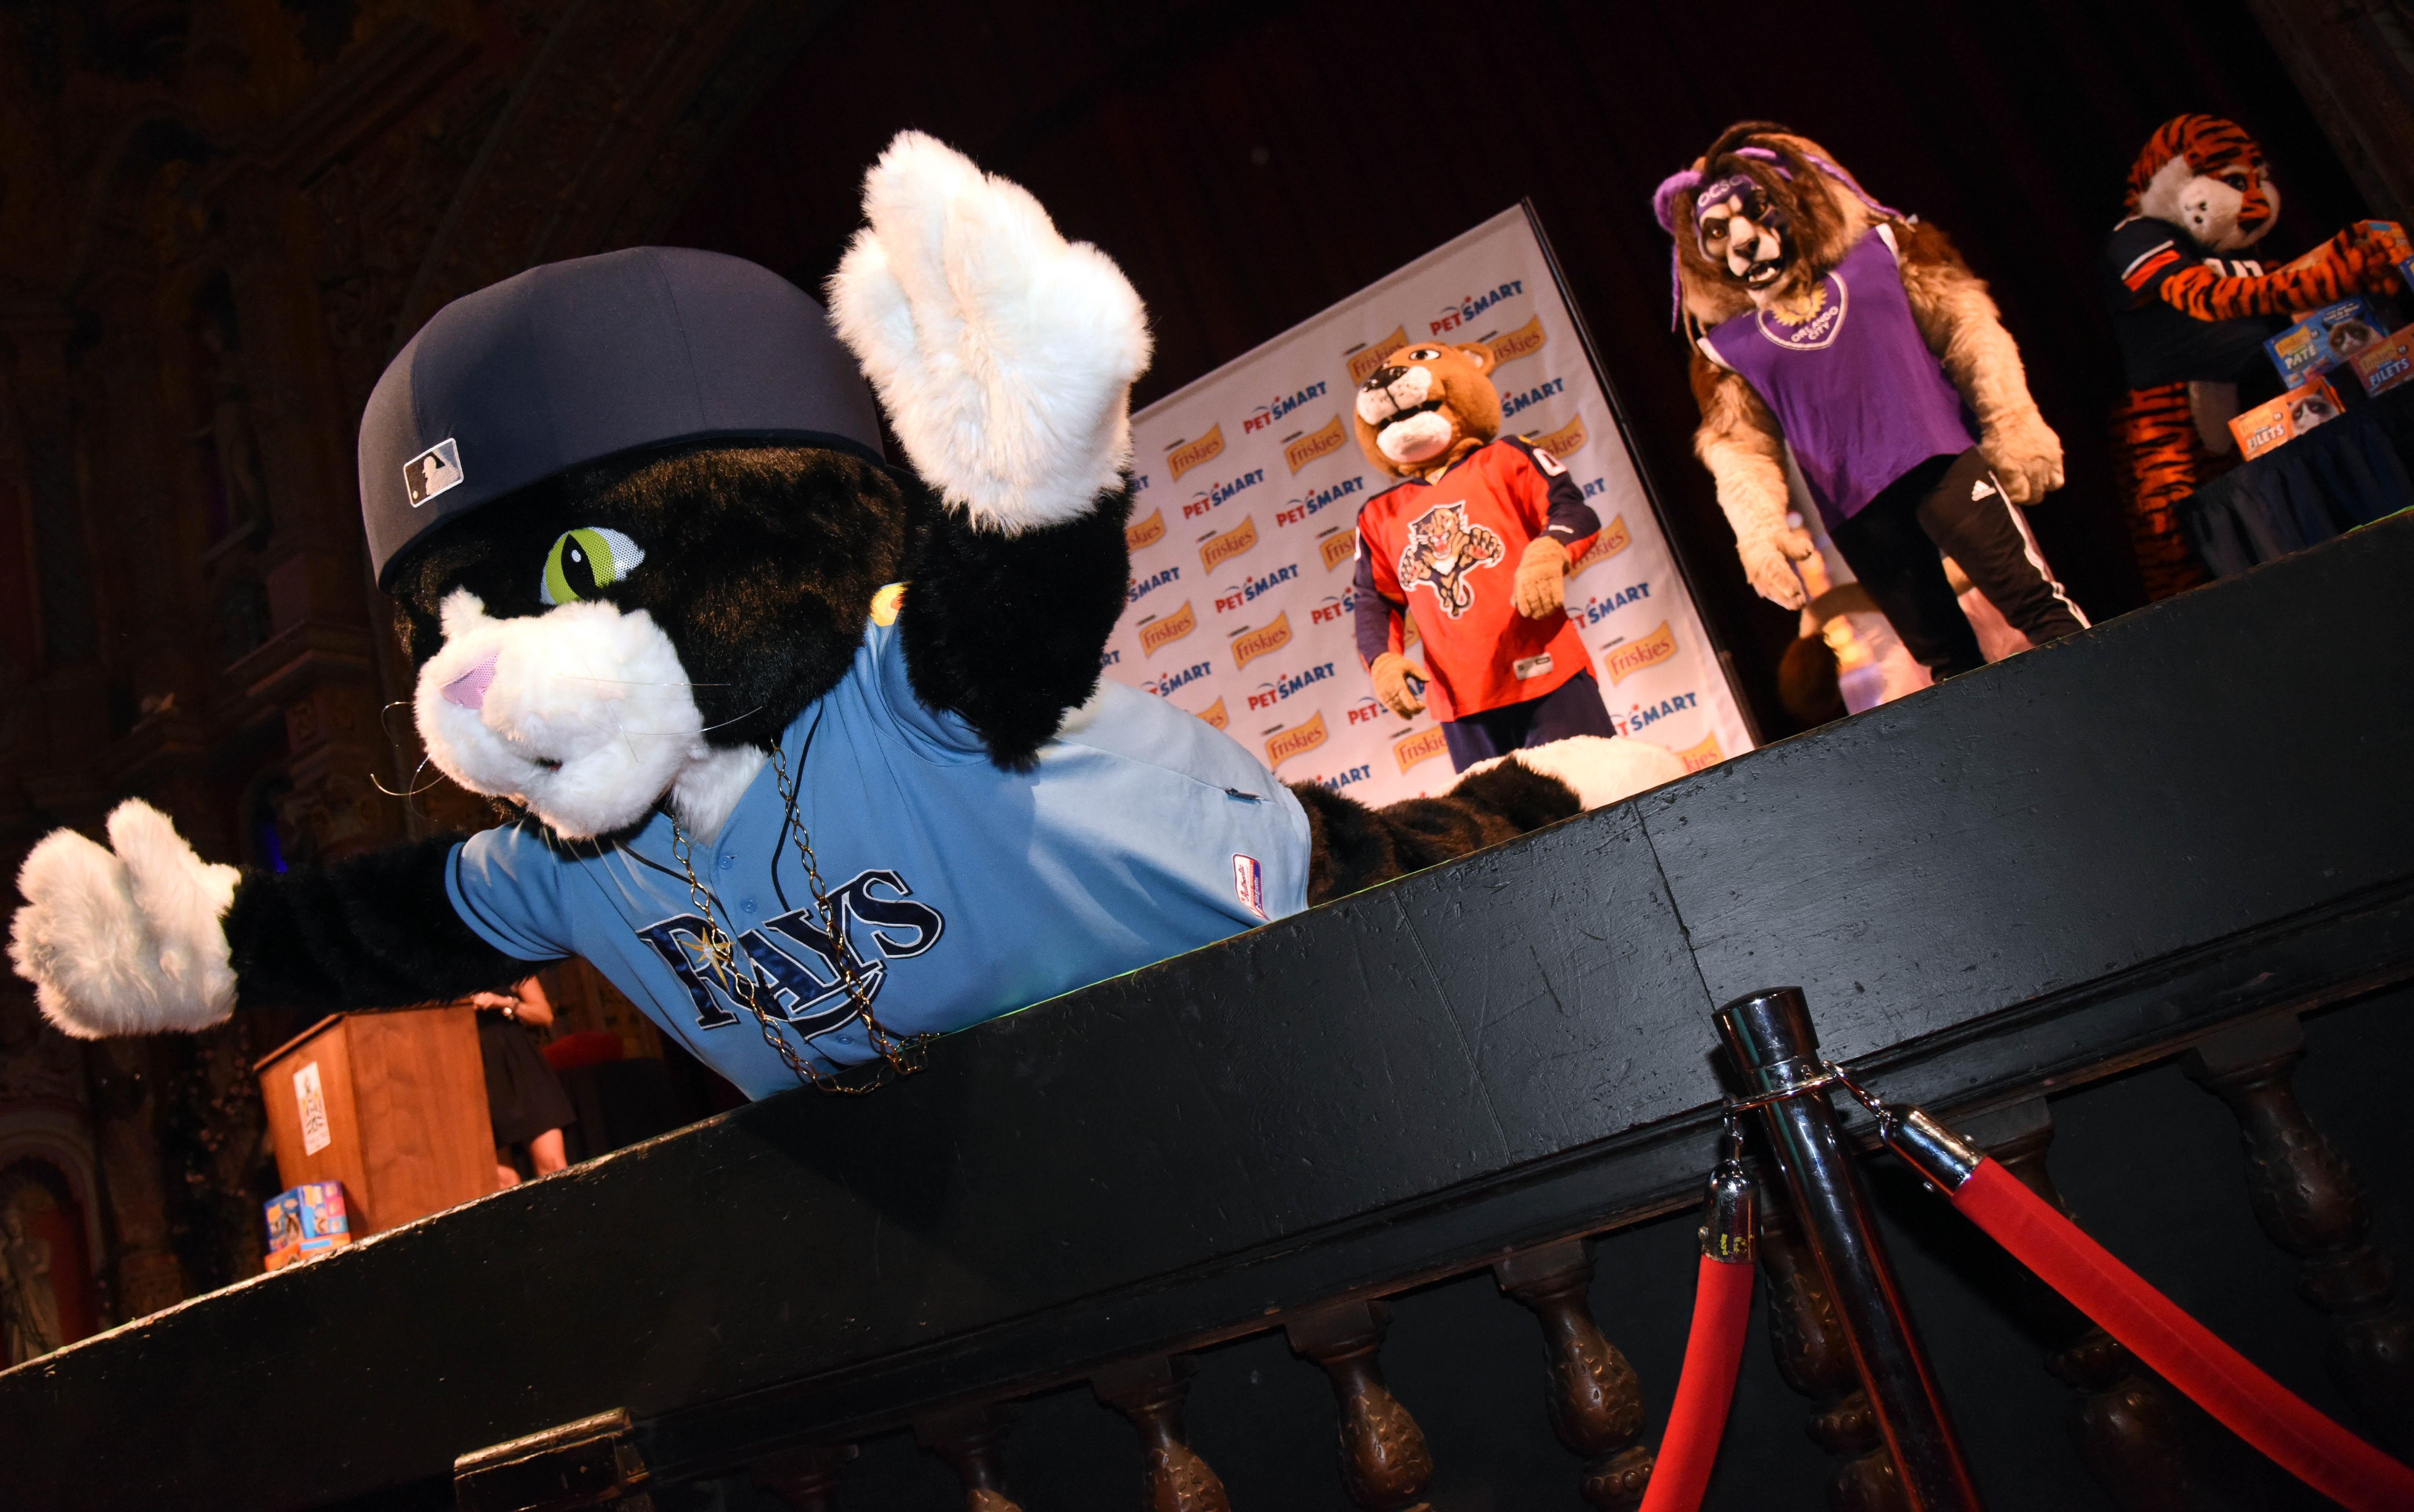 When @raysbaseball mascots DJ Kitty and Raymond stopped by our